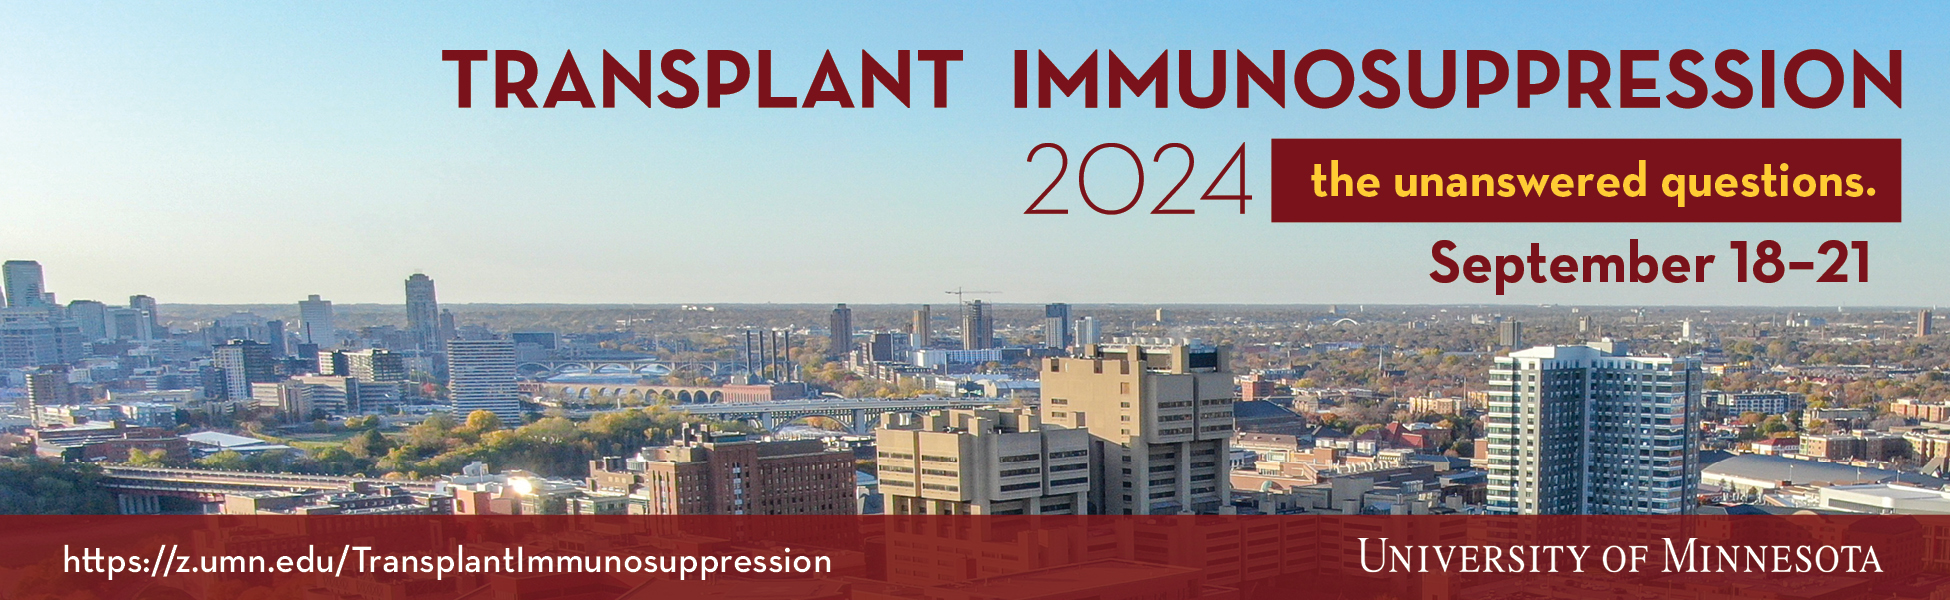 Transplant Immunosuppression 2024: The Unanswered Questions Banner